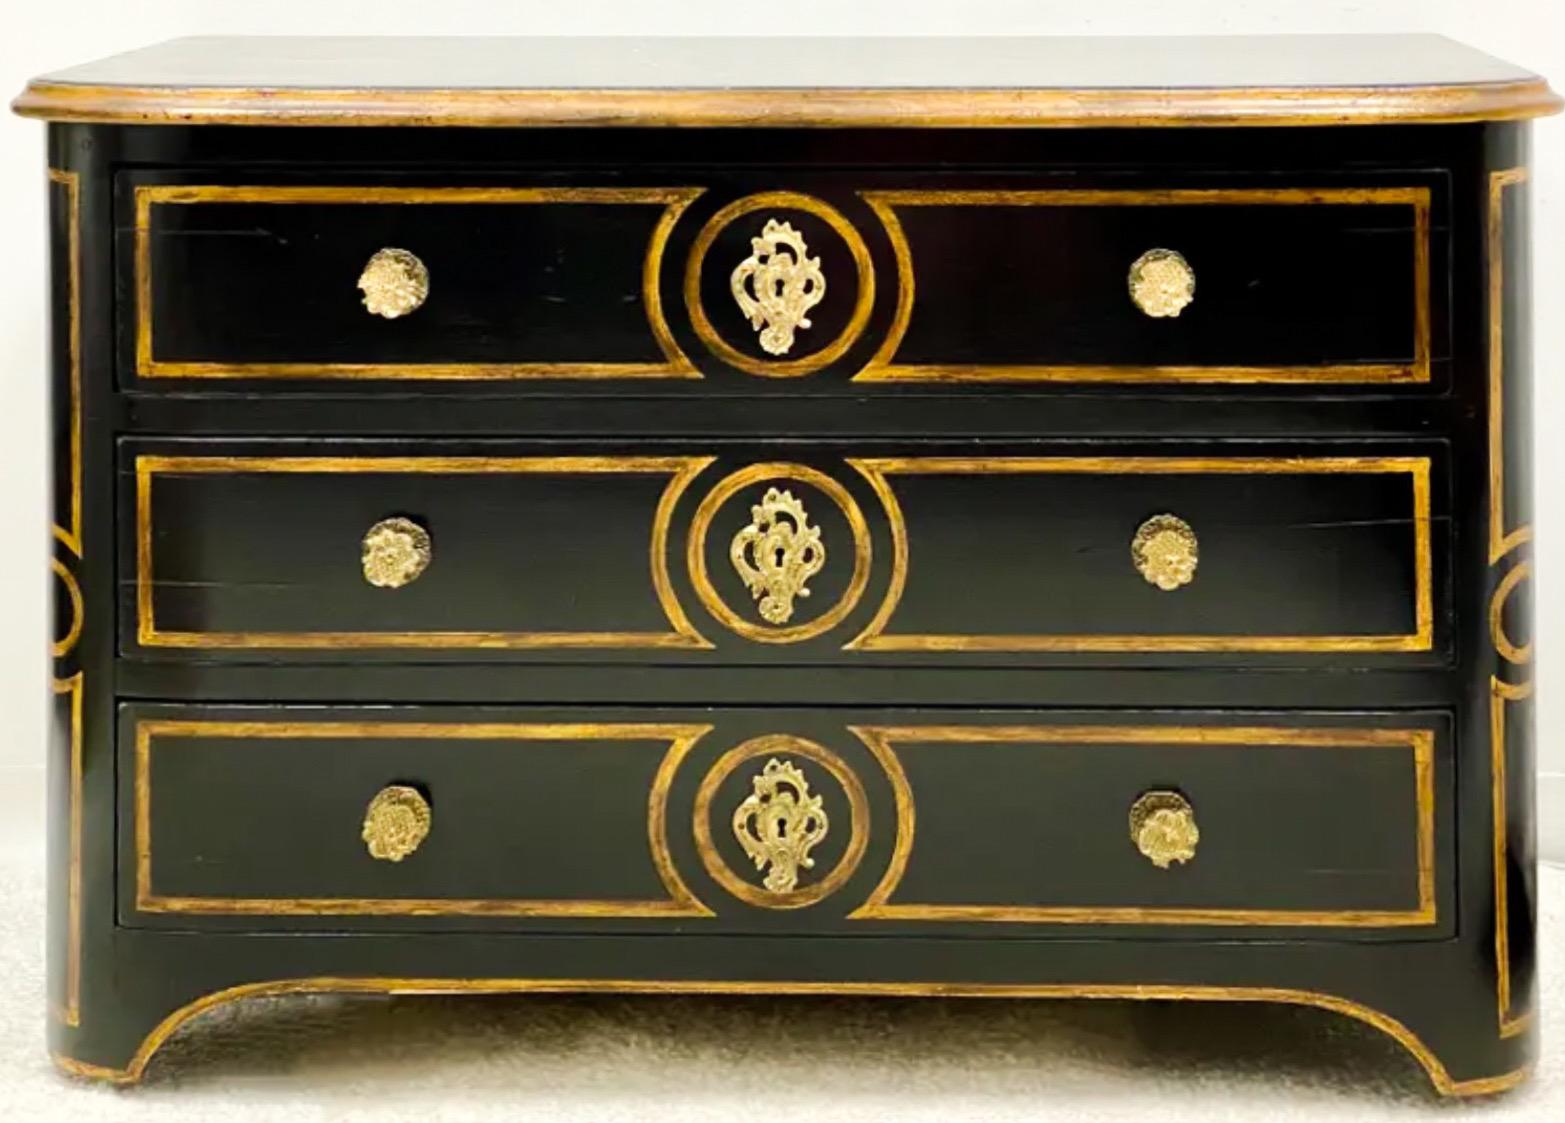 This amazing mid-century continental chest has a painted ebonized finish with gilt accents. The brass hardware is original. It is unmarked.